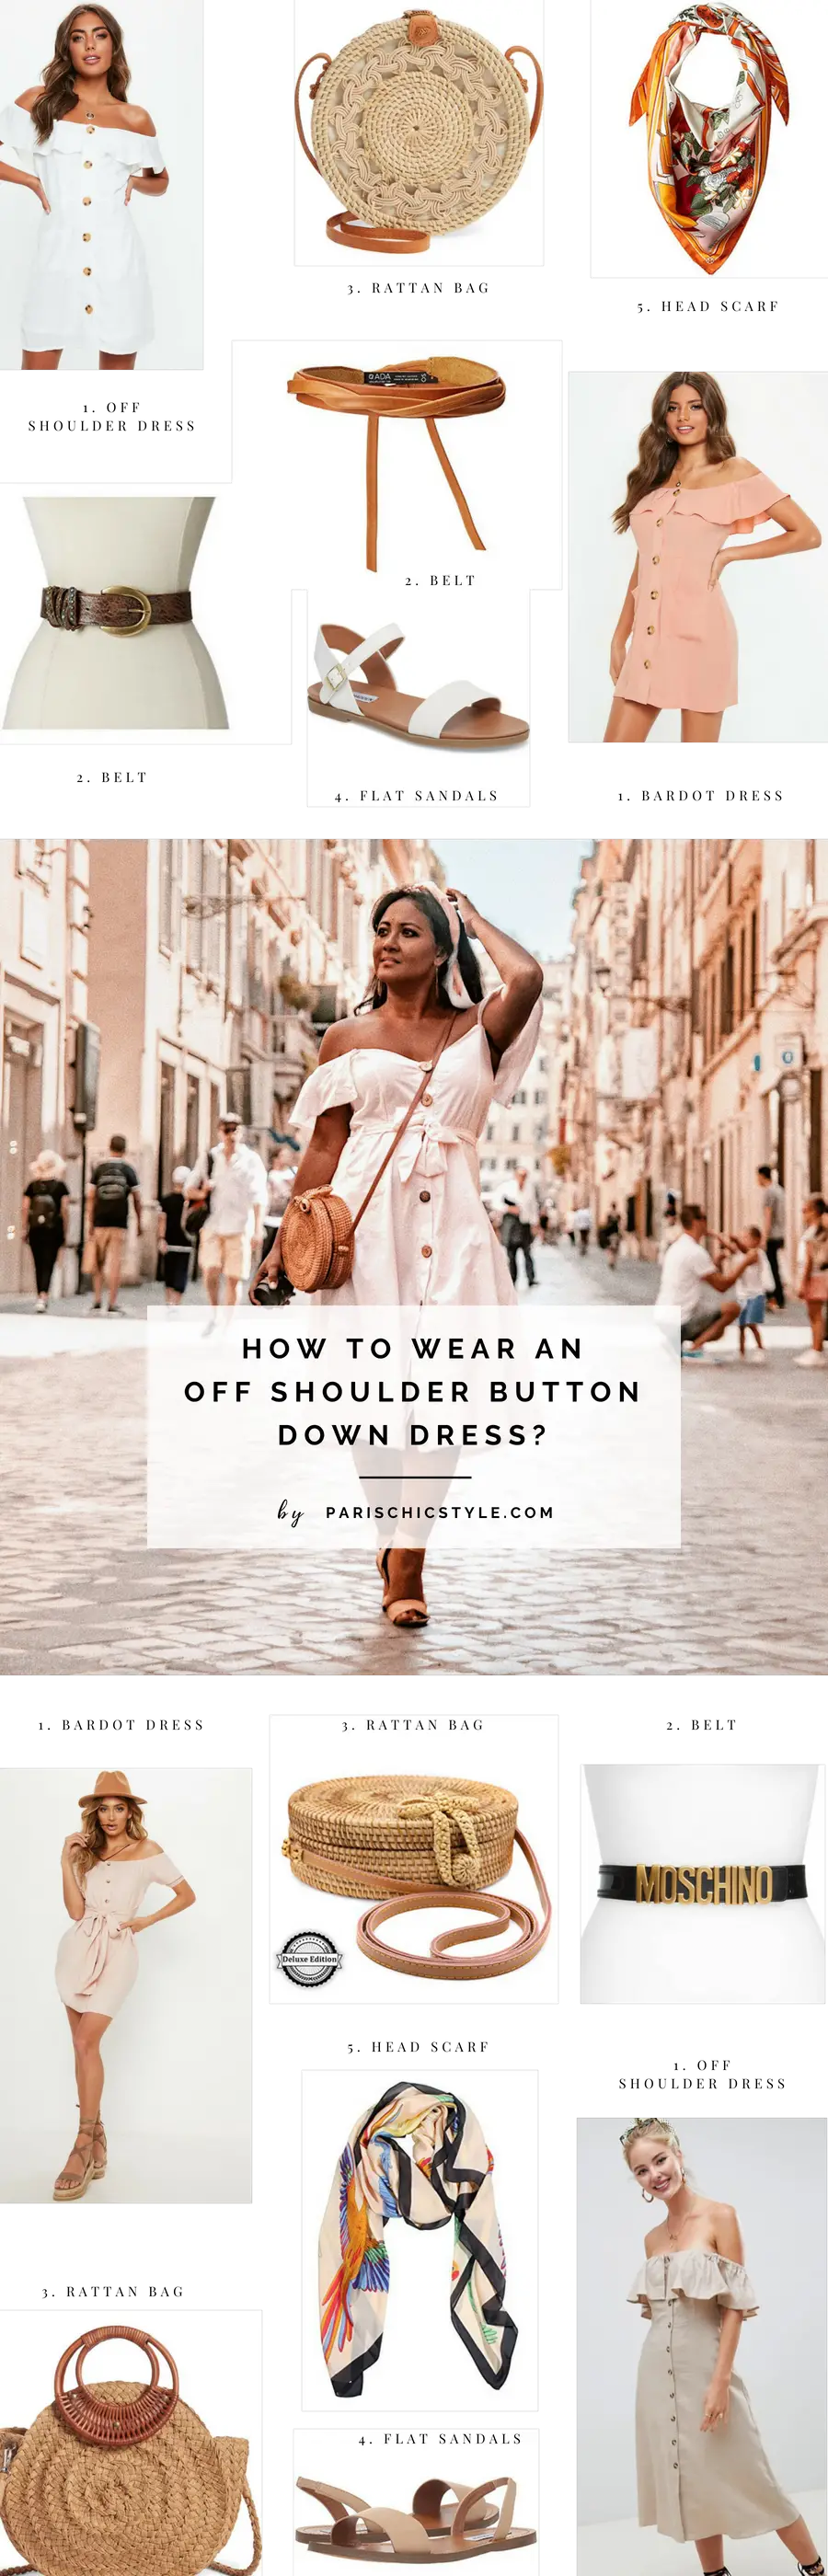 How To Wear An Off Shoulder Dress_ Blush Pink Button Down Dress Lookbook, Fashion, Streetstyle, OOTD, Outfit Of The Day, Paris Chic Style Rome Italy